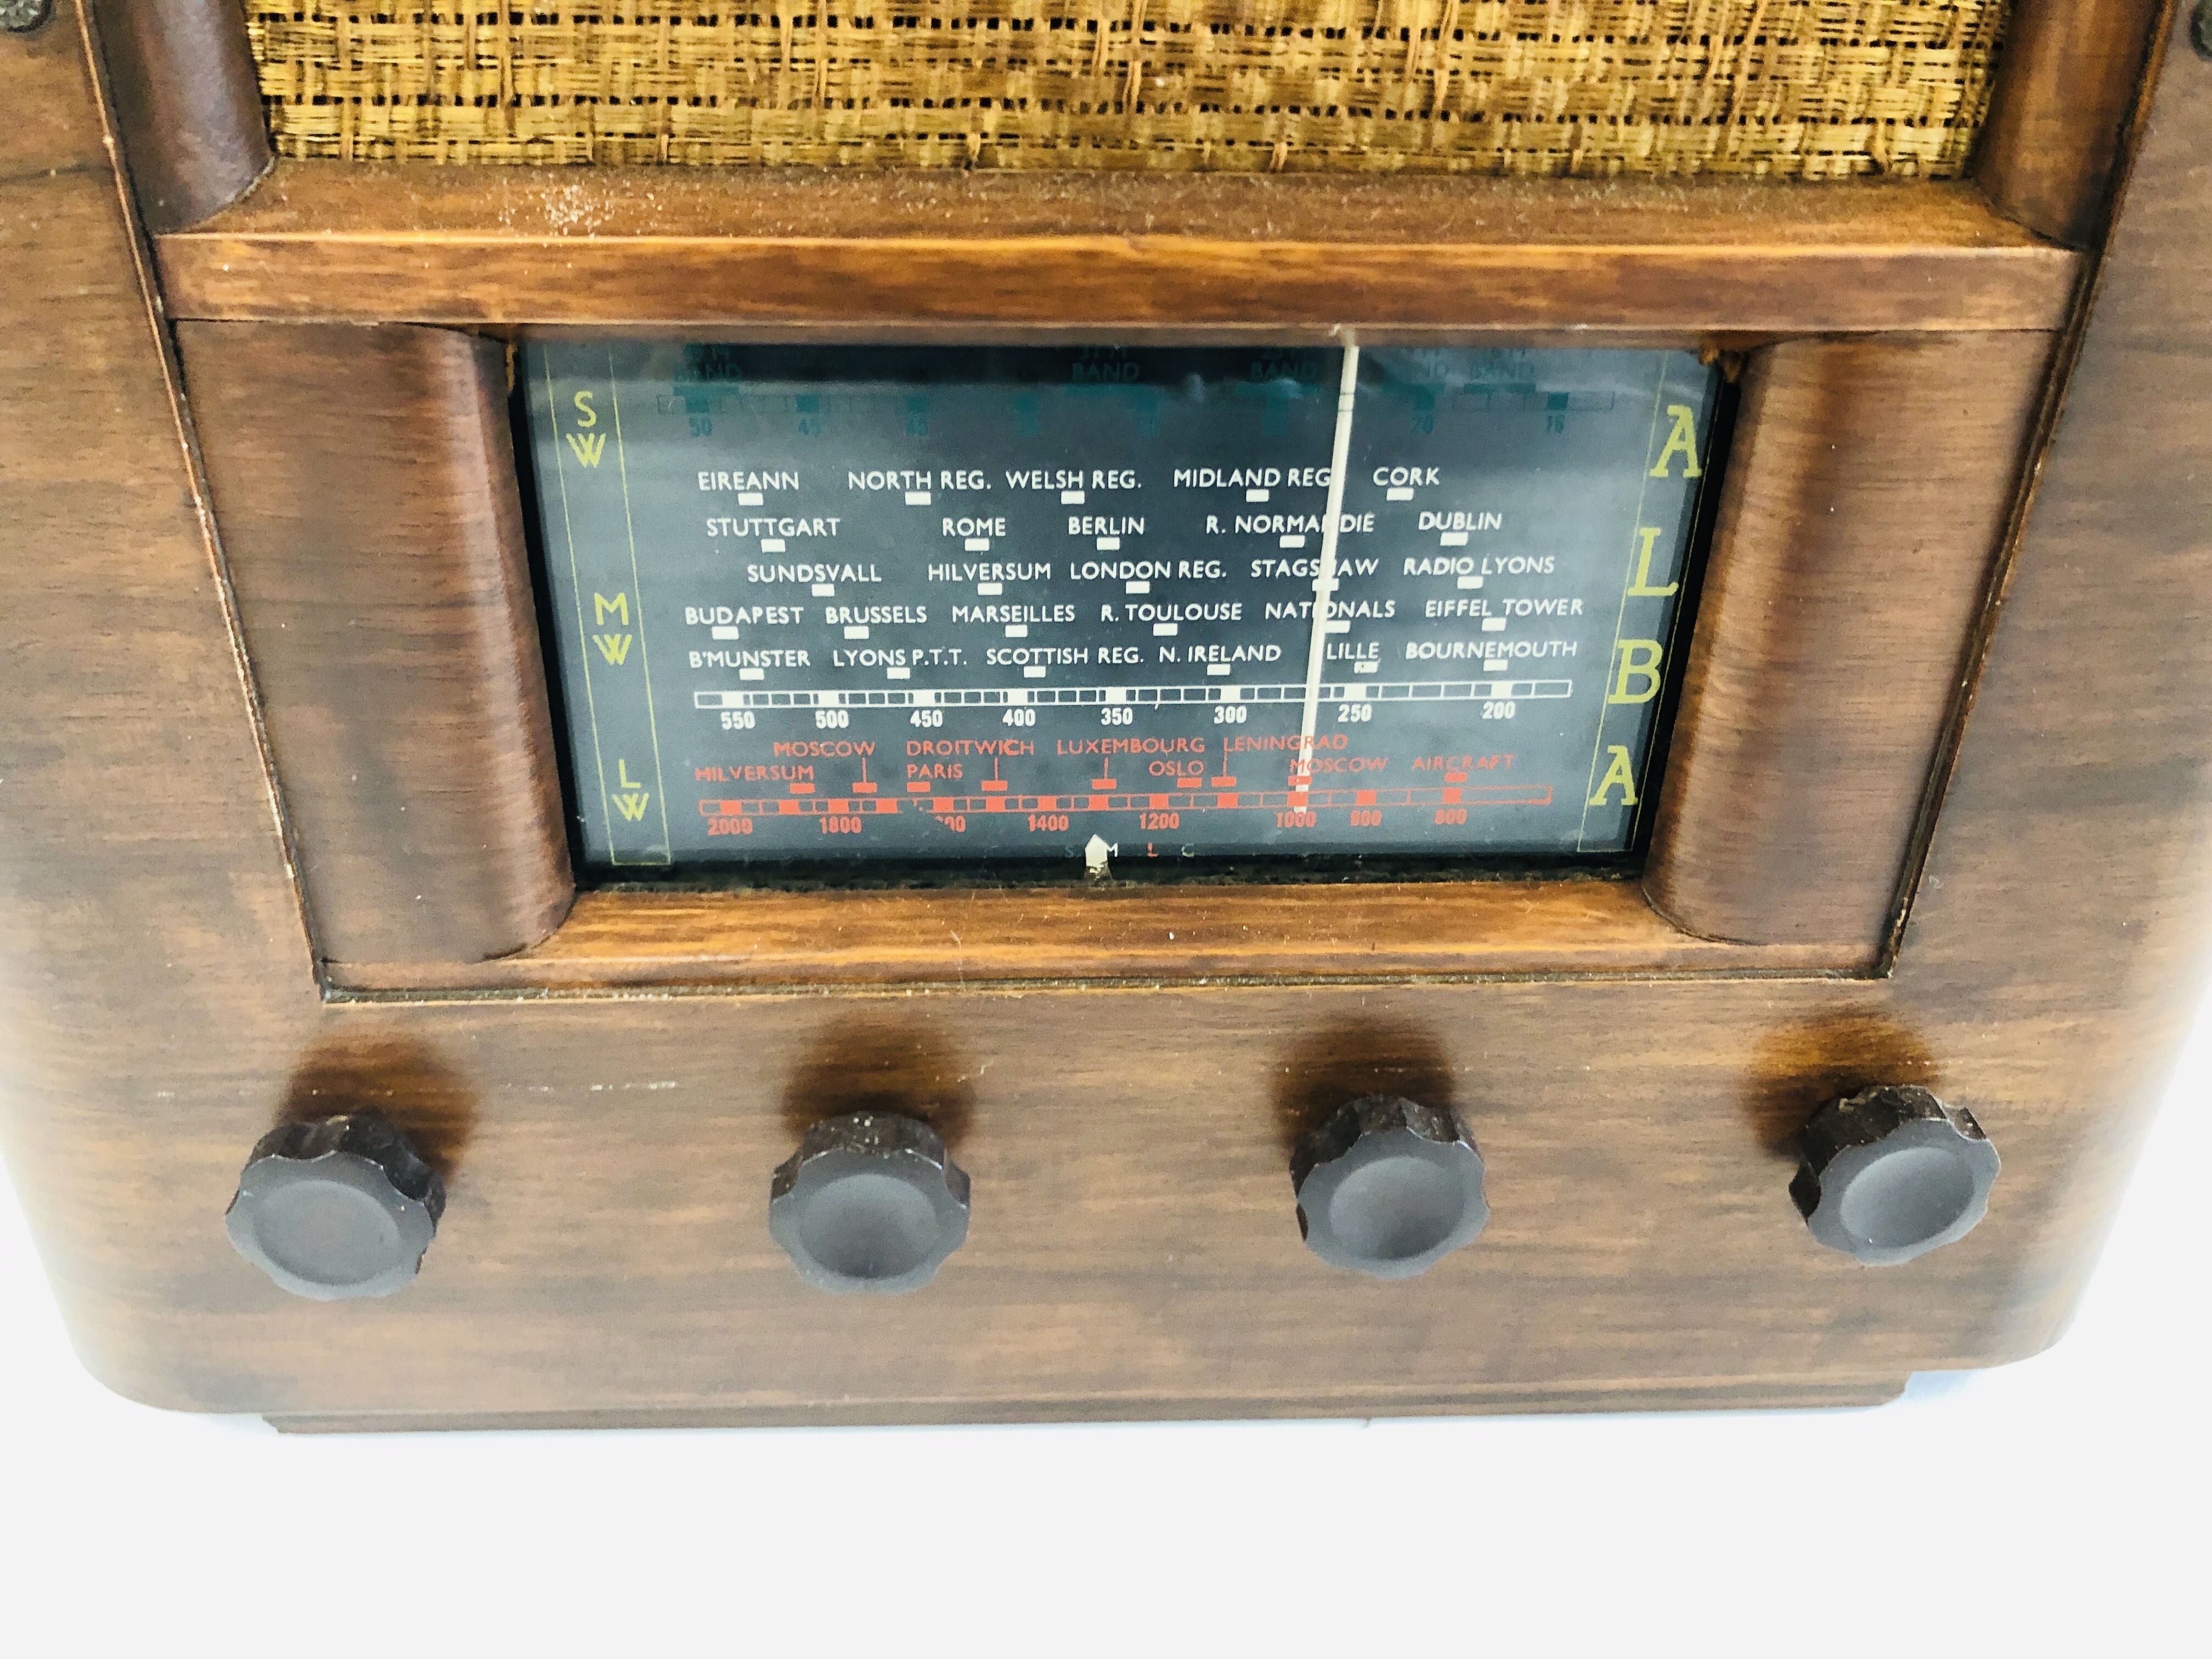 A VINTAGE ALBA RADIO - H 43CM X W 36CM X D 21CM - COLLECTORS ITEM ONLY - SOLD AS SEEN. - Image 4 of 7